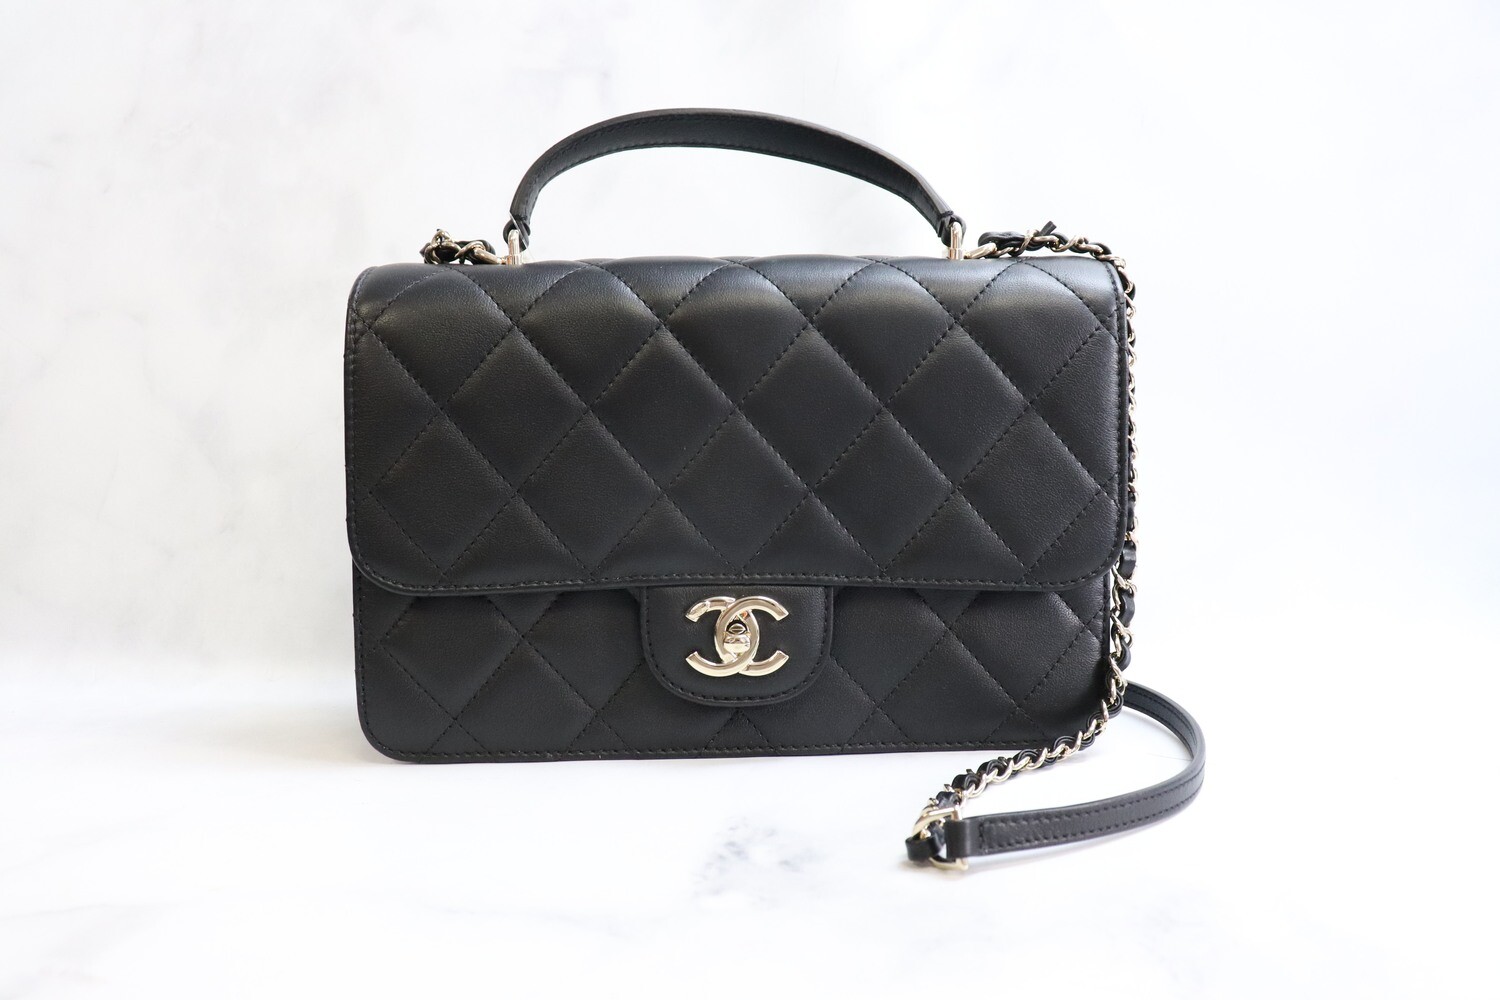 Chanel Seasonal Coco Lady Top Handle Bag, 21A Black Lambskin Leather, Shiny  Gold Hardware, New in Dutstbag